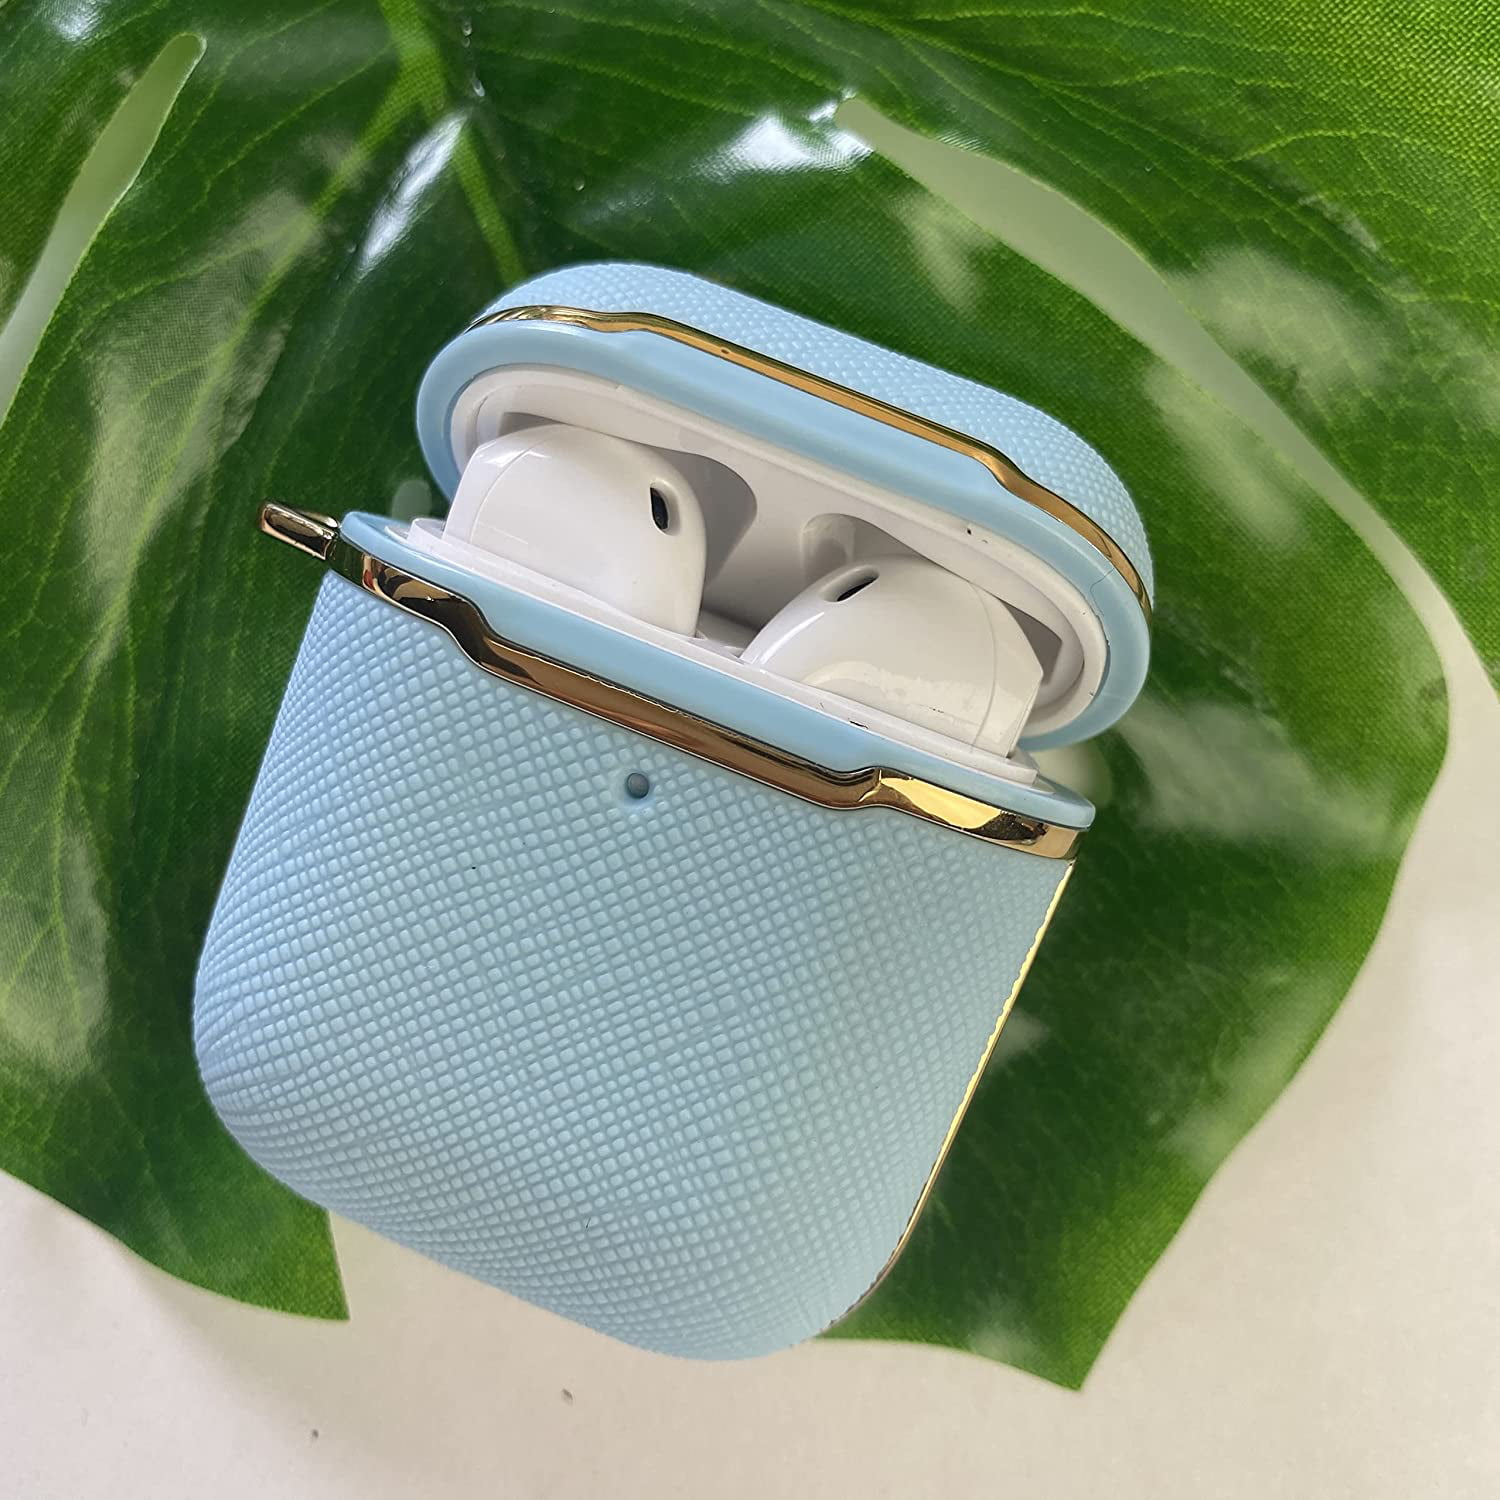 TANGABA AirPods Case Cover for AirPod 2&1, Full-Body Protective Hard Shell  Leather Airpods Protectiv…See more TANGABA AirPods Case Cover for AirPod